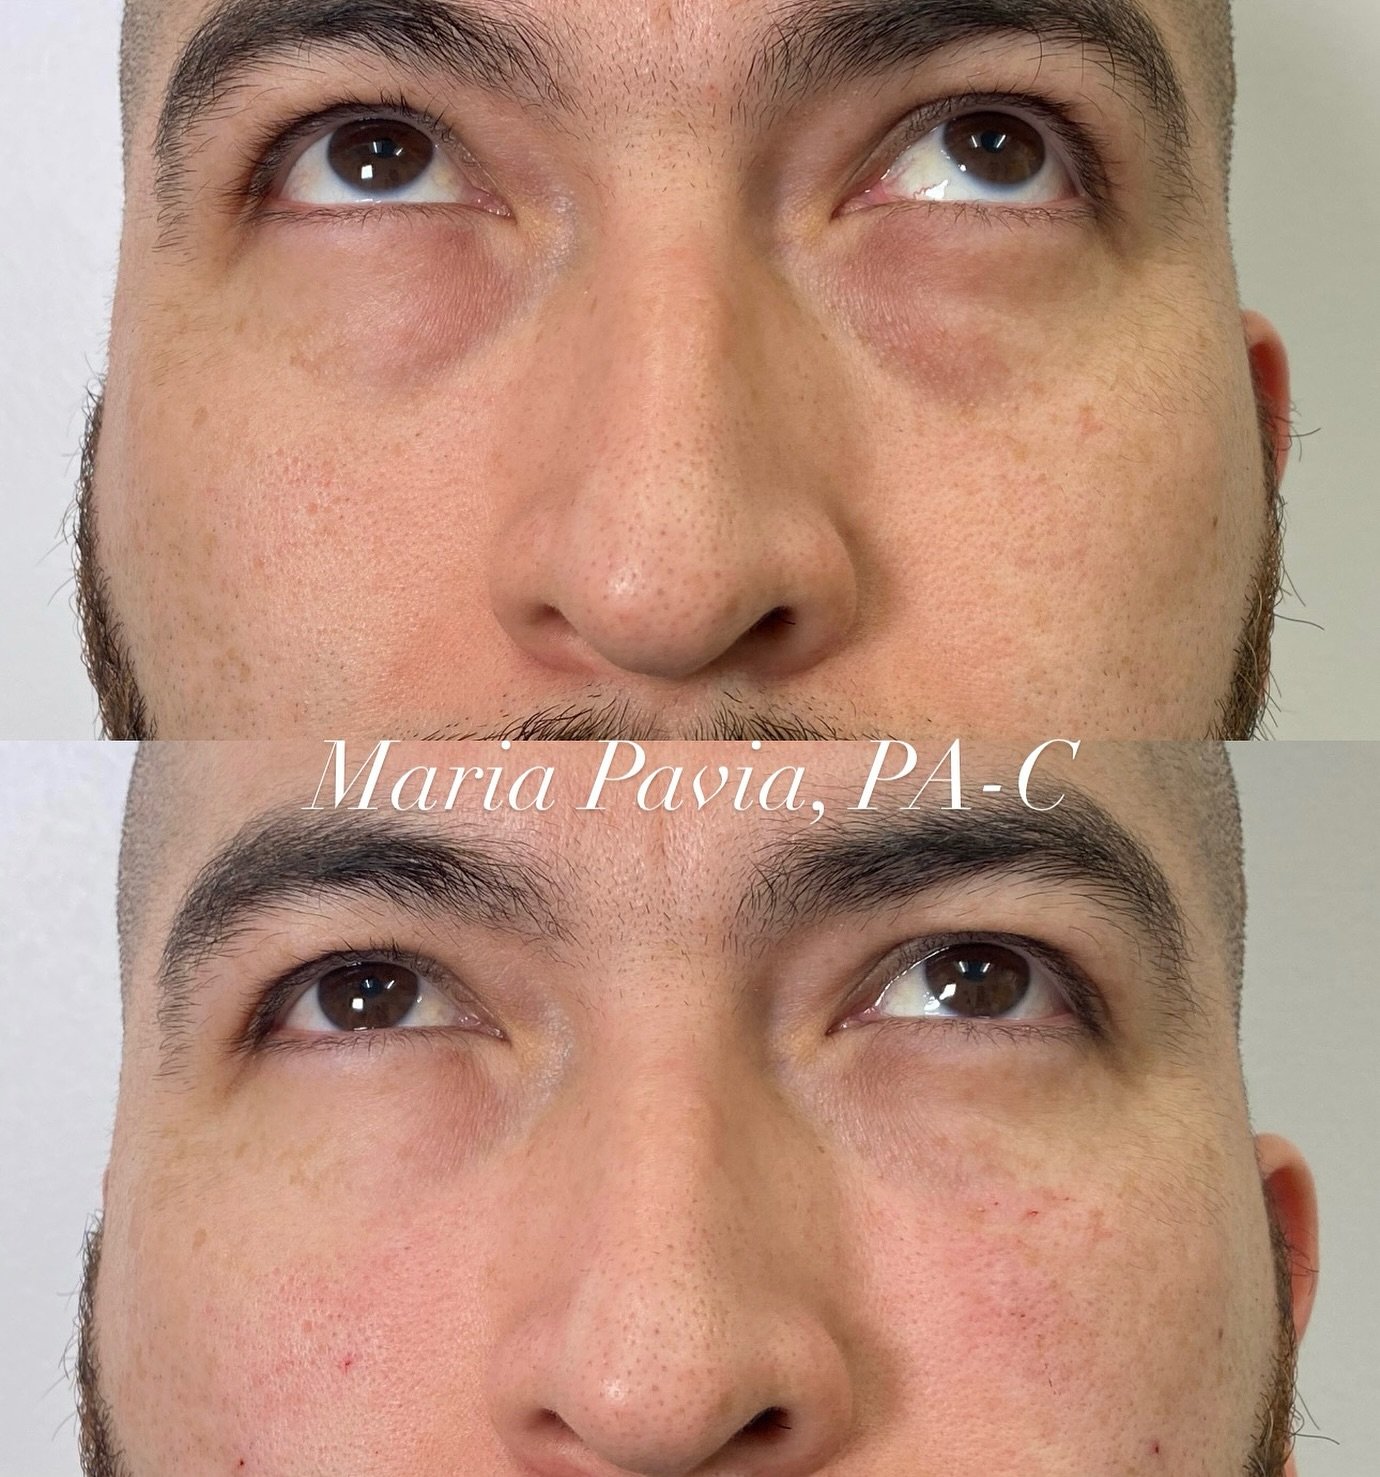 MALE UNDER EYE REJUVENATION💫

Through precise micro-injections of filler in the tear through area, volume was restored to the hollow areas under the eye which resulted in a refreshed and ✨brighter✨ appearance. 

📲 Call/Text (248)924-4058 for more i